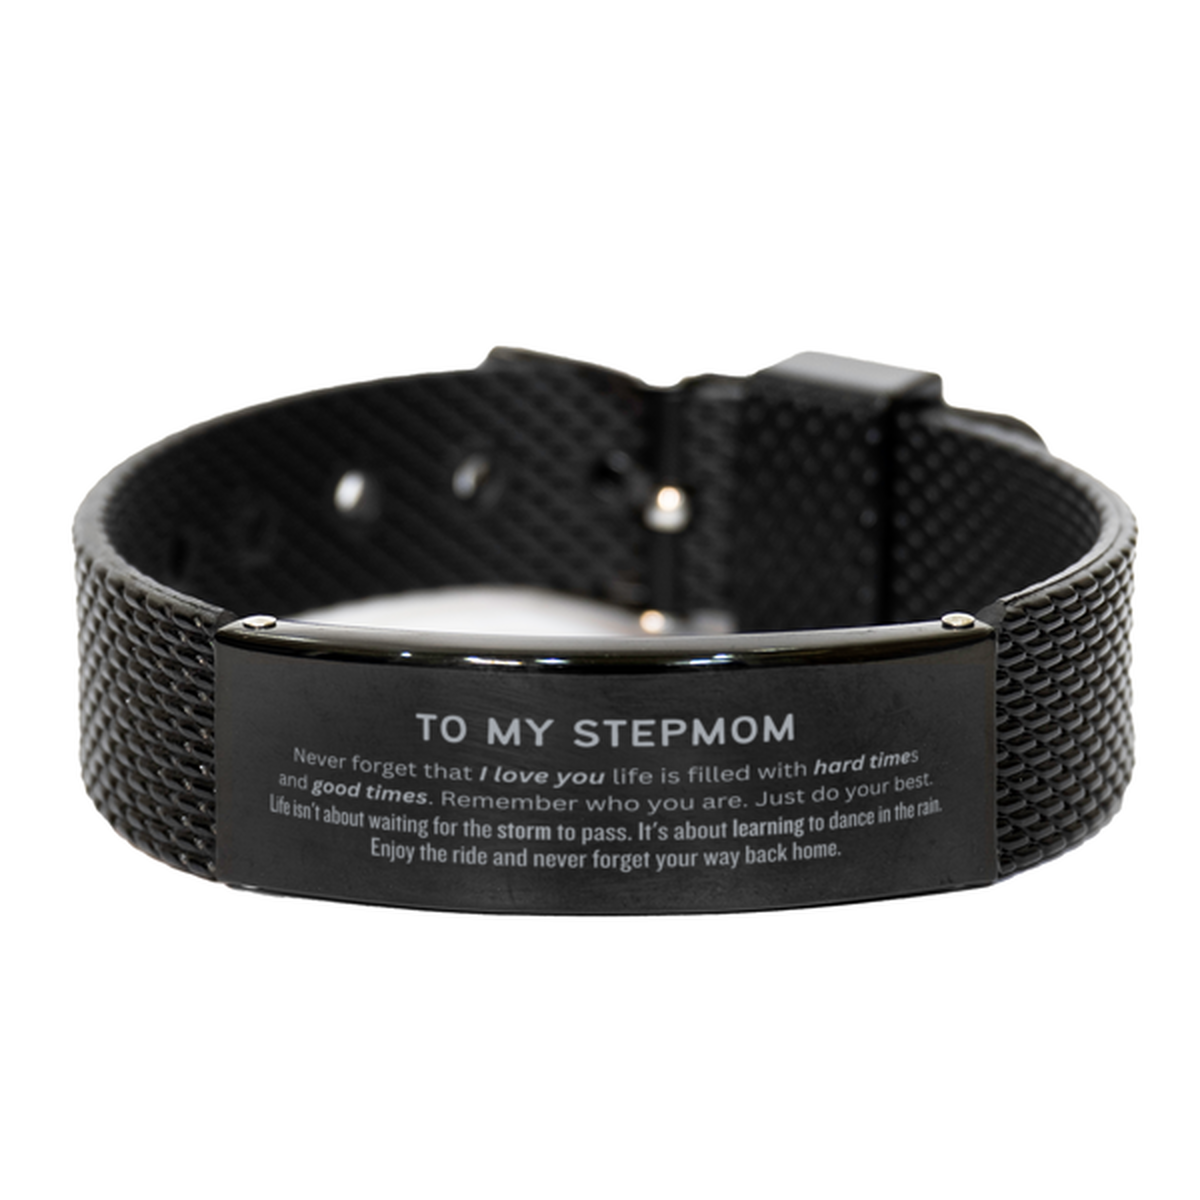 Christmas Stepmom Black Shark Mesh Bracelet Gifts, To My Stepmom Birthday Thank You Gifts For Stepmom, Graduation Unique Gifts For Stepmom To My Stepmom Never forget that I love you life is filled with hard times and good times. Remember who you are. Just